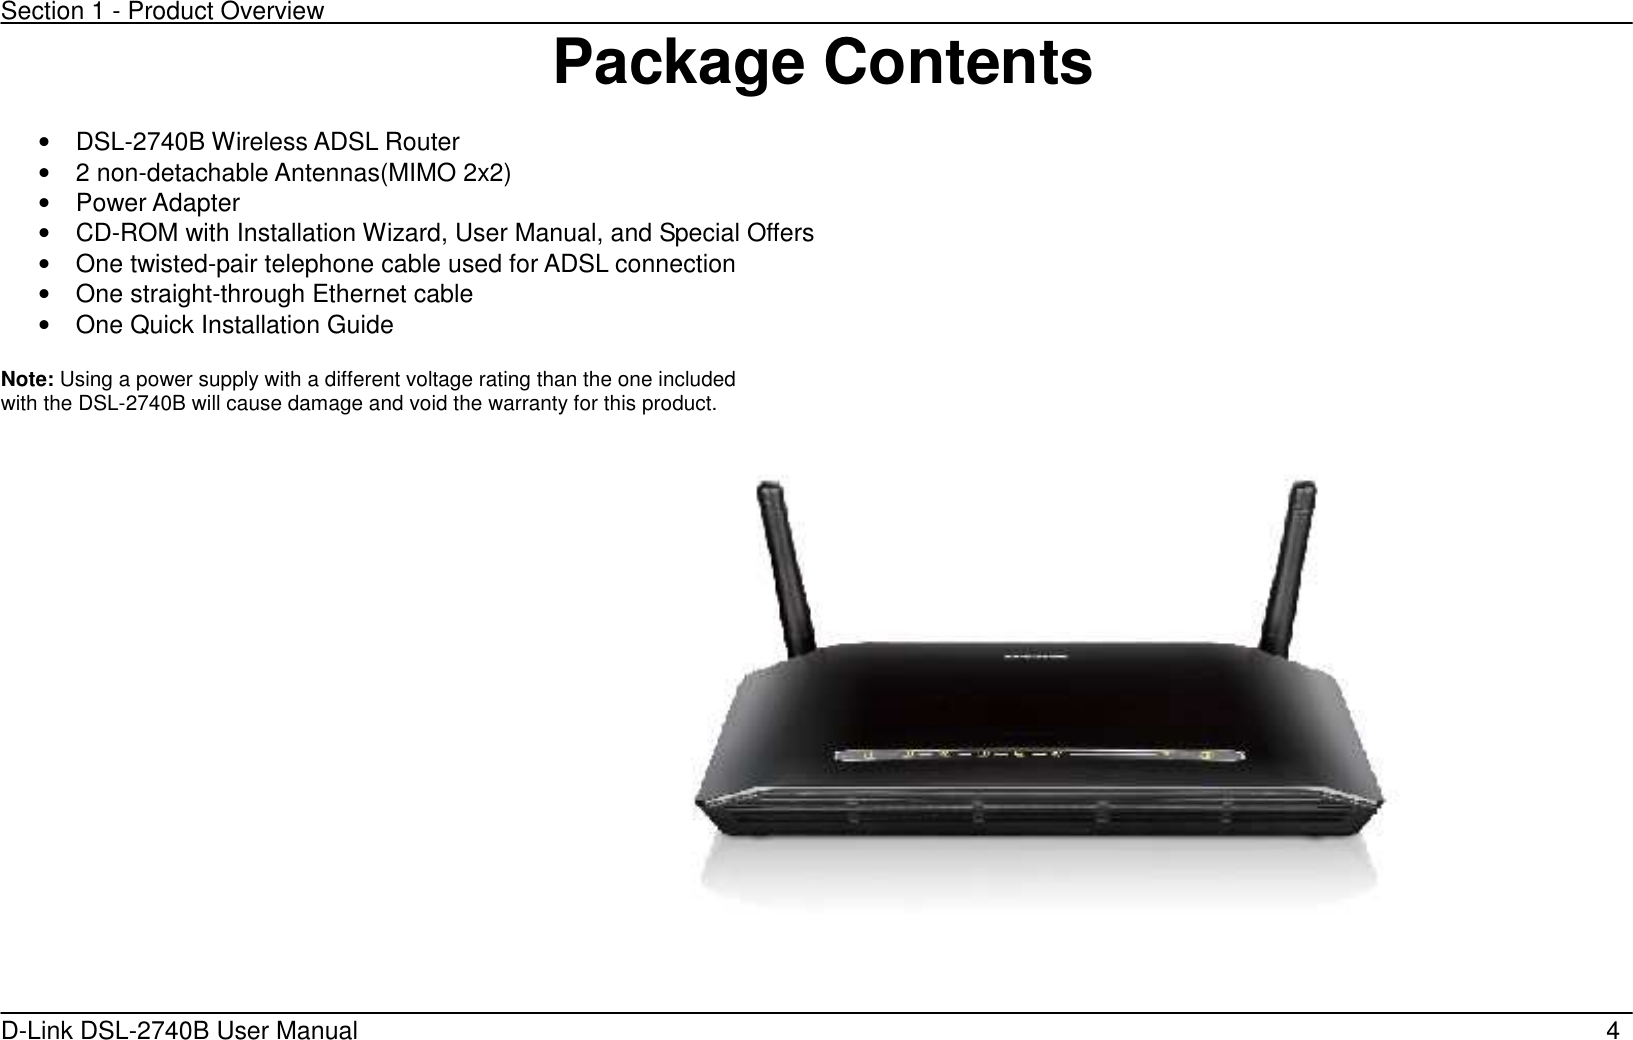 Section 1 - Product Overview D-Link DSL-2740B User Manual                                                  4Package Contents  •  DSL-2740B Wireless ADSL Router •  2 non-detachable Antennas(MIMO 2x2) •  Power Adapter   •  CD-ROM with Installation Wizard, User Manual, and Special Offers     •  One twisted-pair telephone cable used for ADSL connection   •  One straight-through Ethernet cable •  One Quick Installation Guide    Note: Using a power supply with a different voltage rating than the one included with the DSL-2740B will cause damage and void the warranty for this product.                                                                                                                                                                                                                                